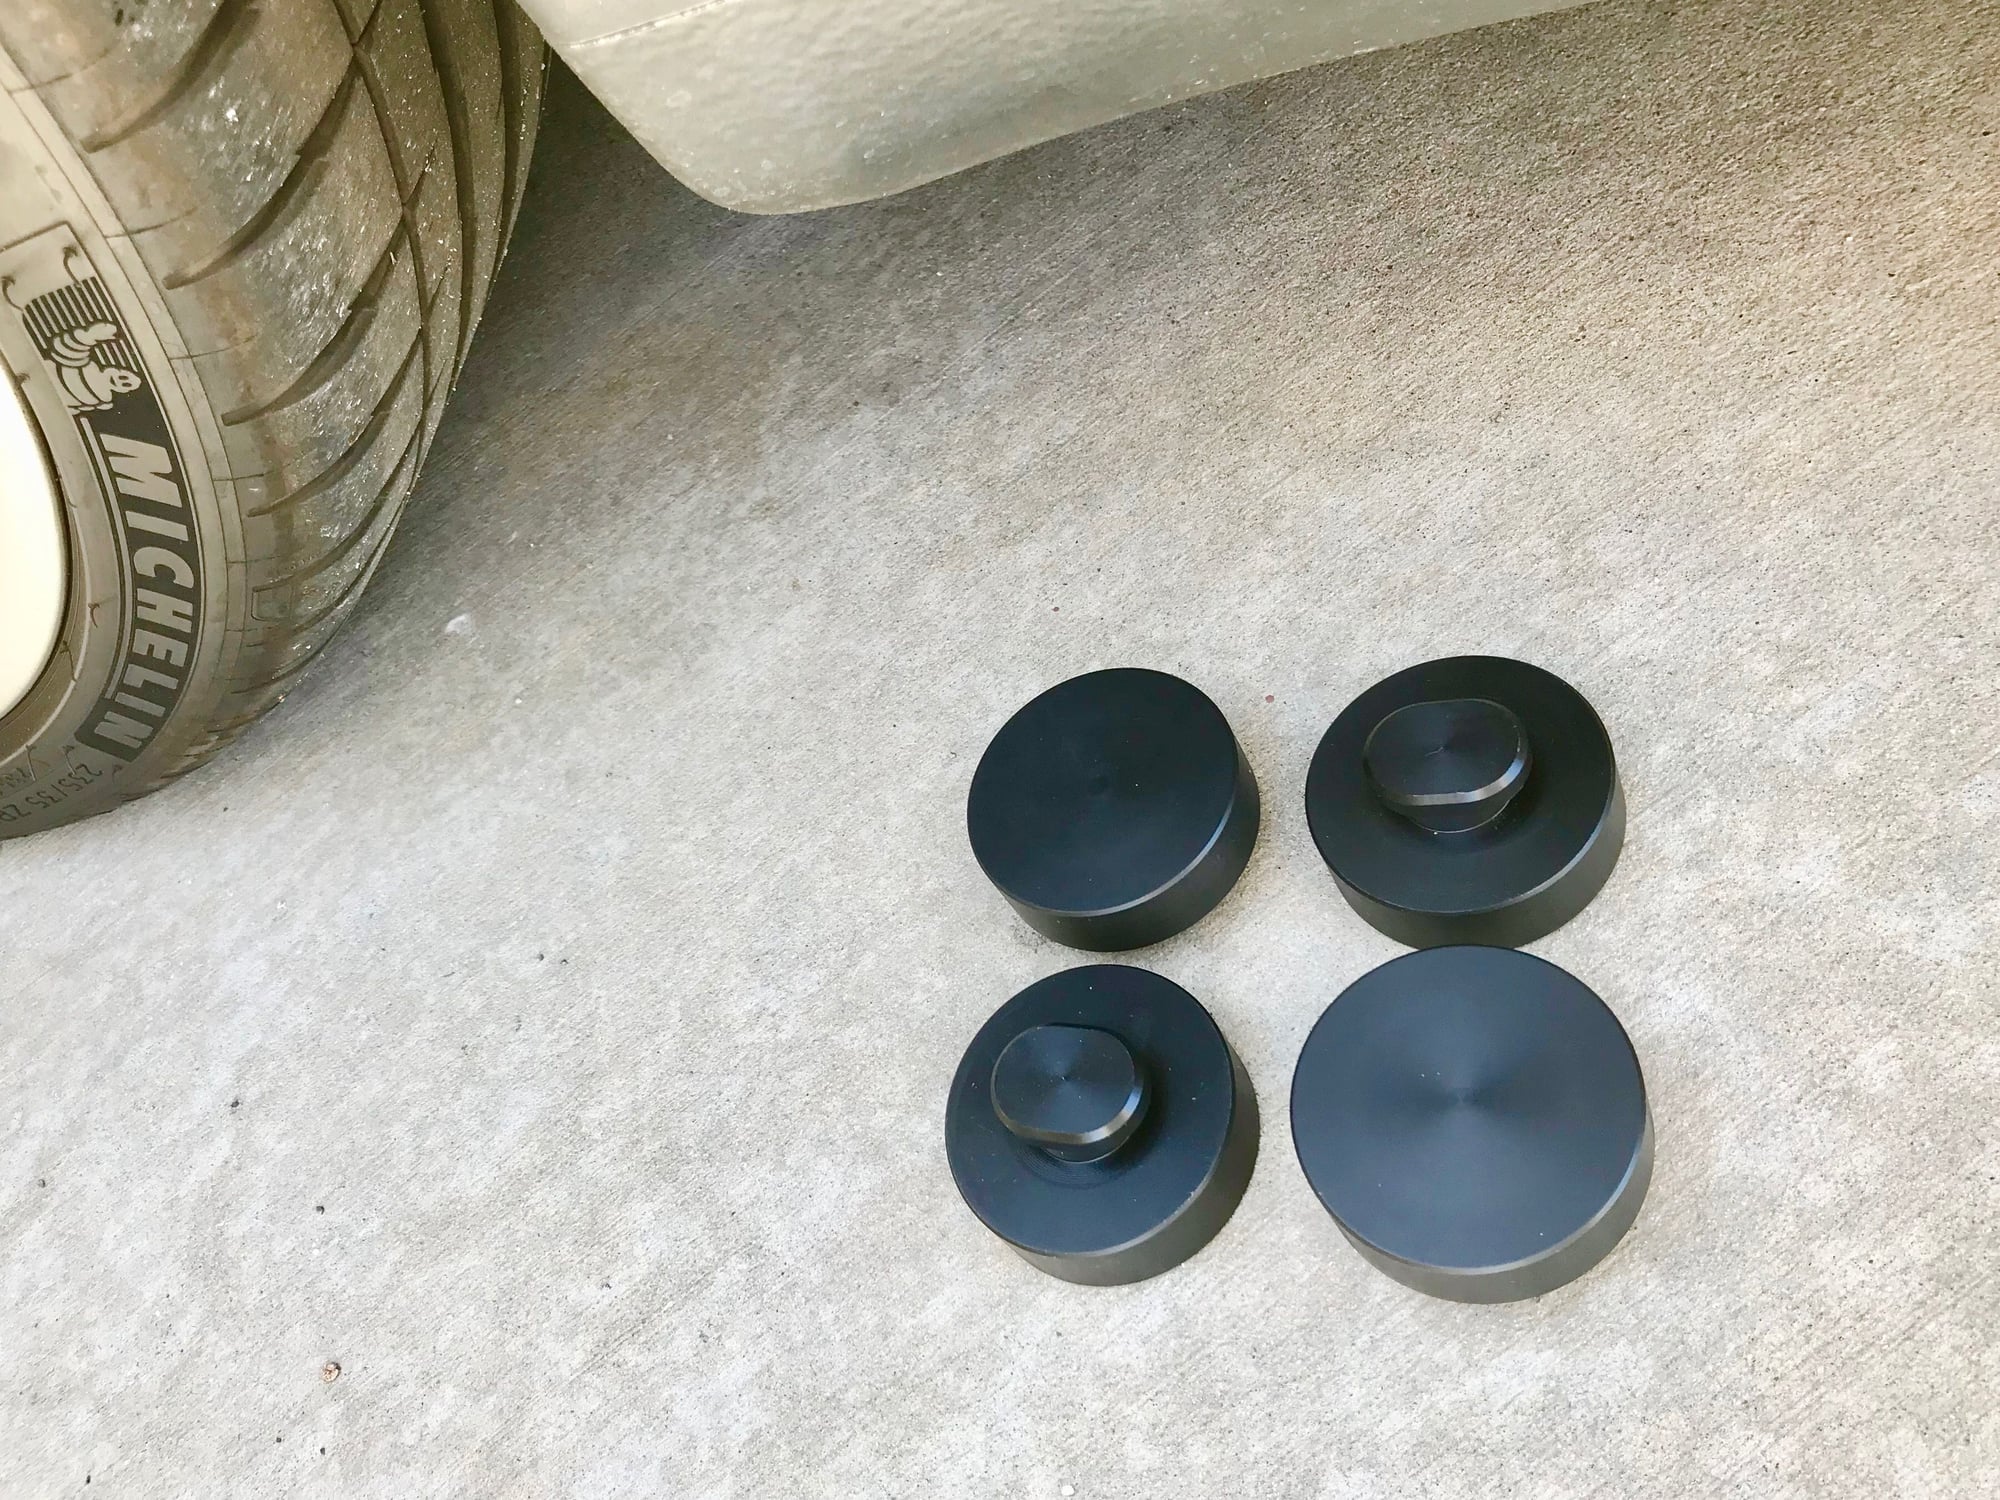 Accessories - Lift Pucks - set of 4 pucks - Used - 2001 to 2012 Porsche 911 - Seal Beach, CA 90740, United States